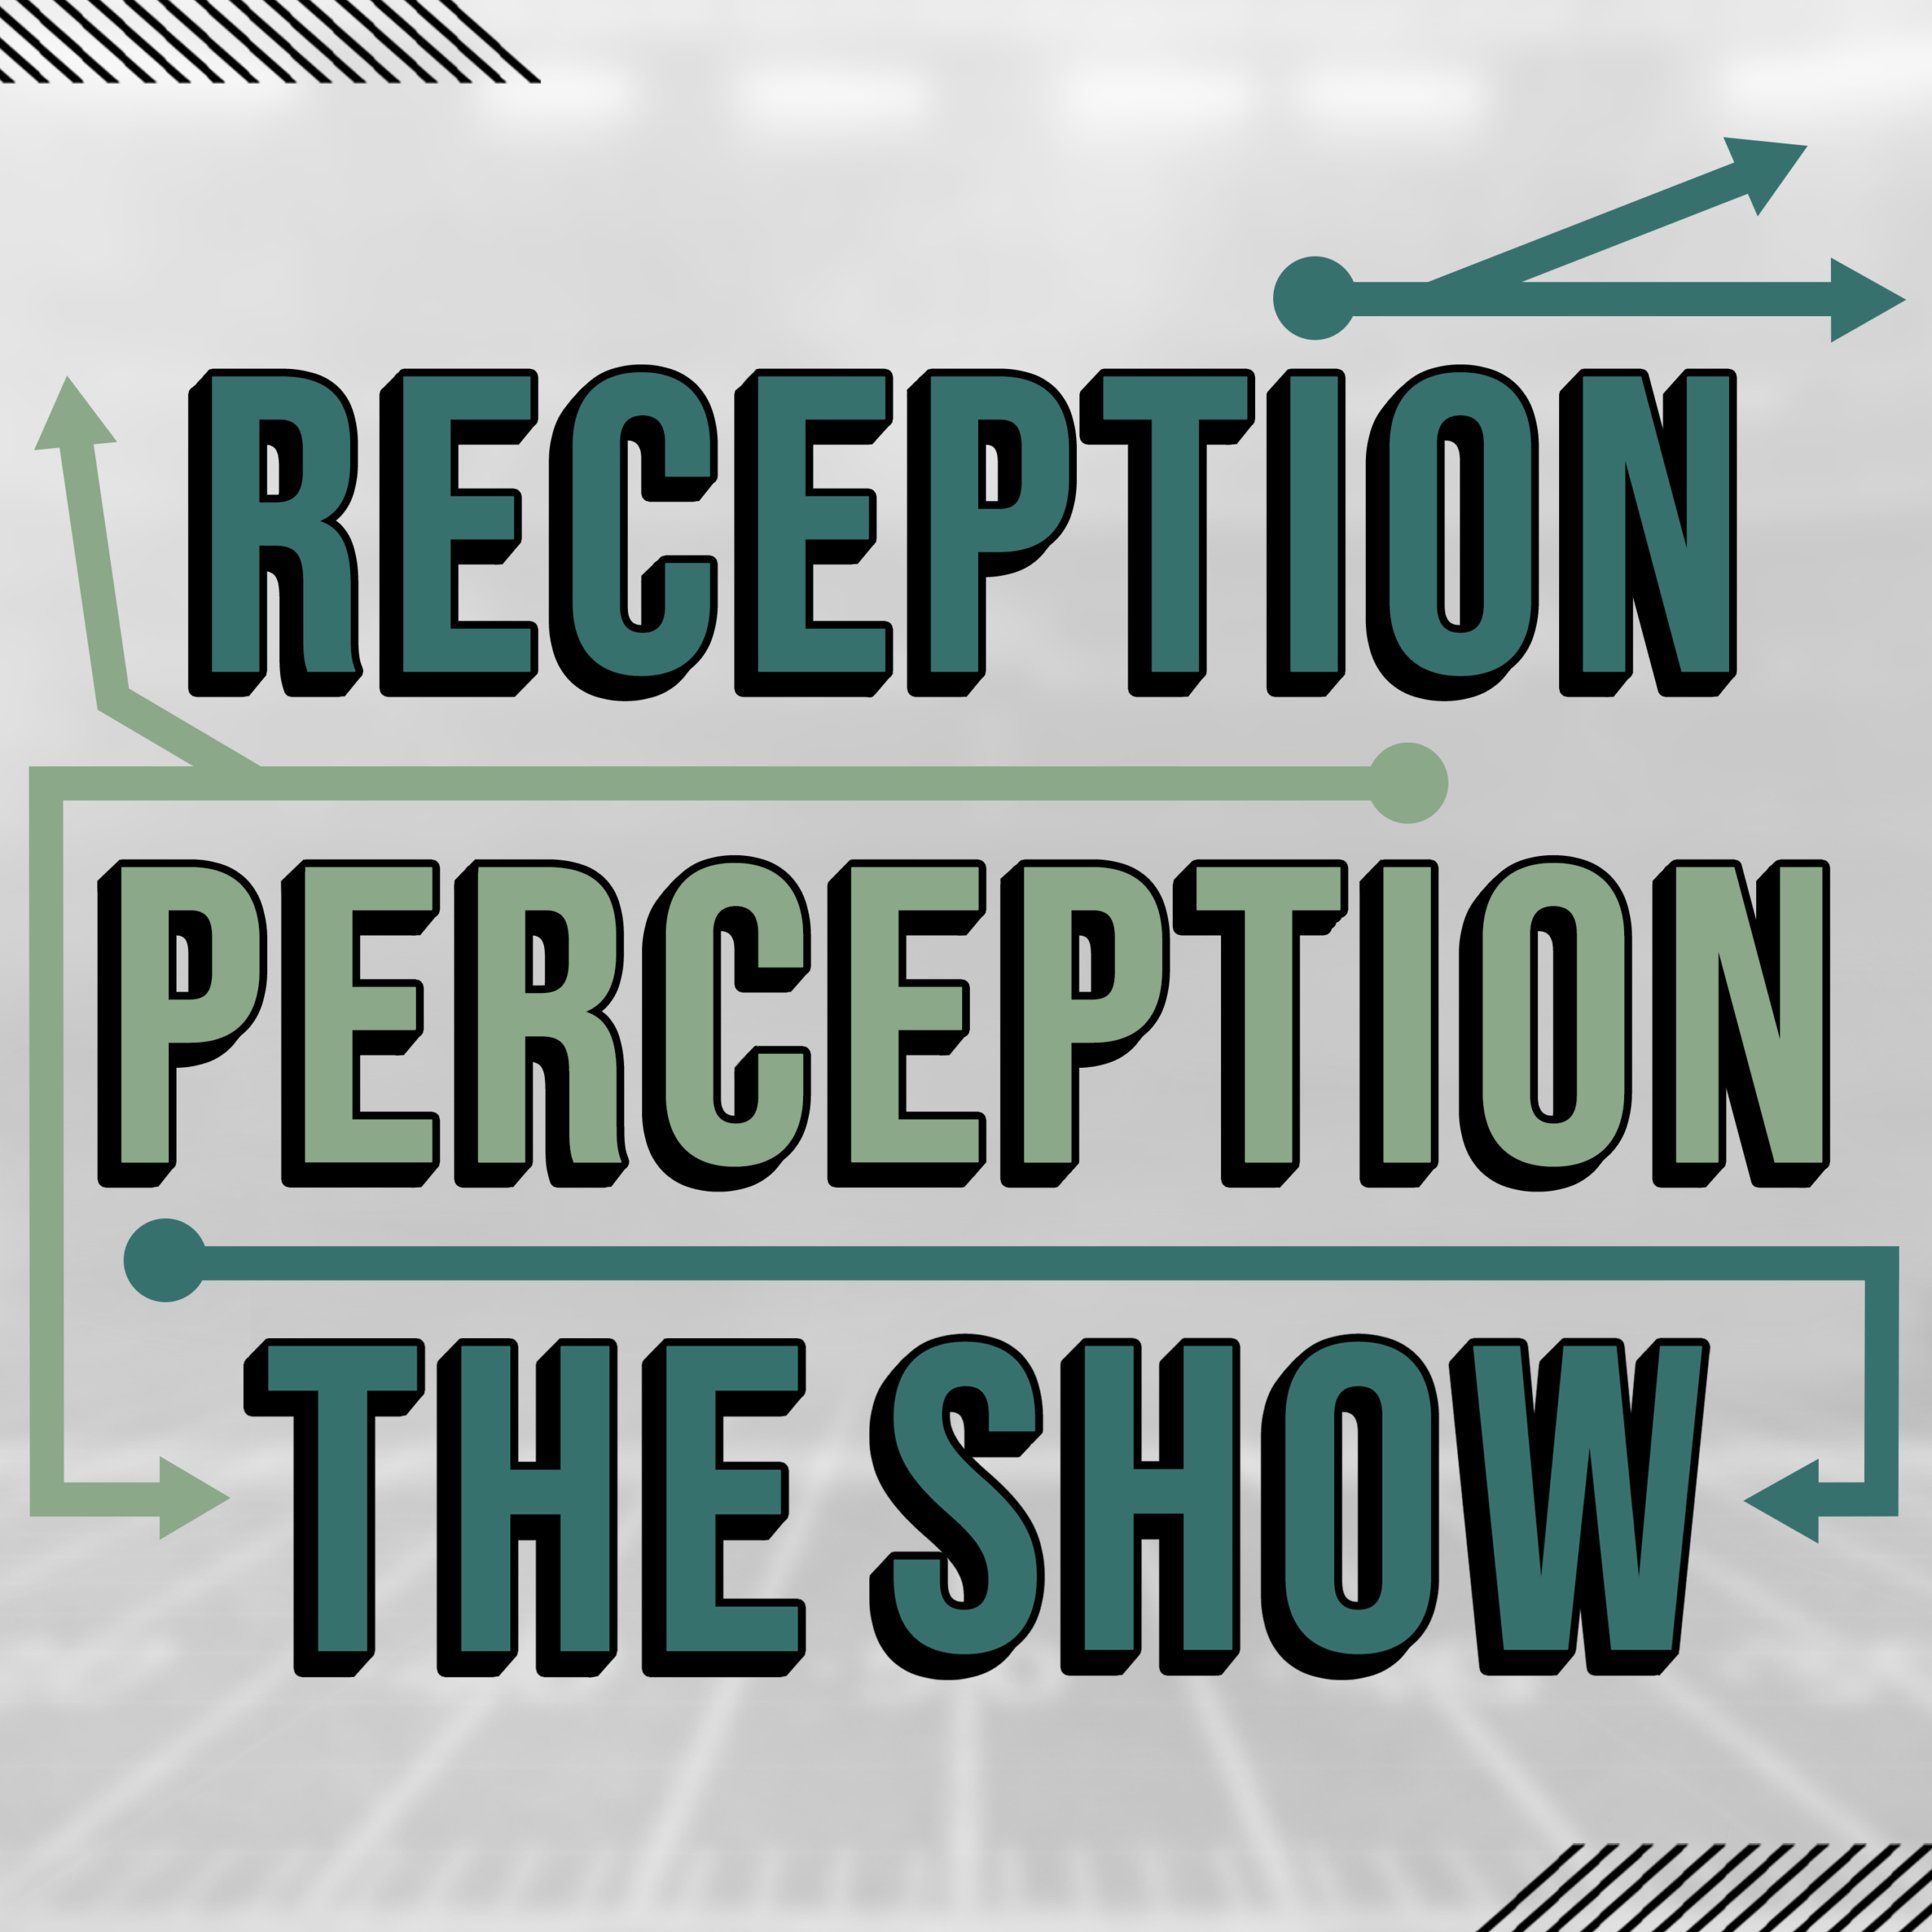 Reception Perception The Show – 2022 WR Blitz: Kupp, McLaurin, Pittman and Packers new corps